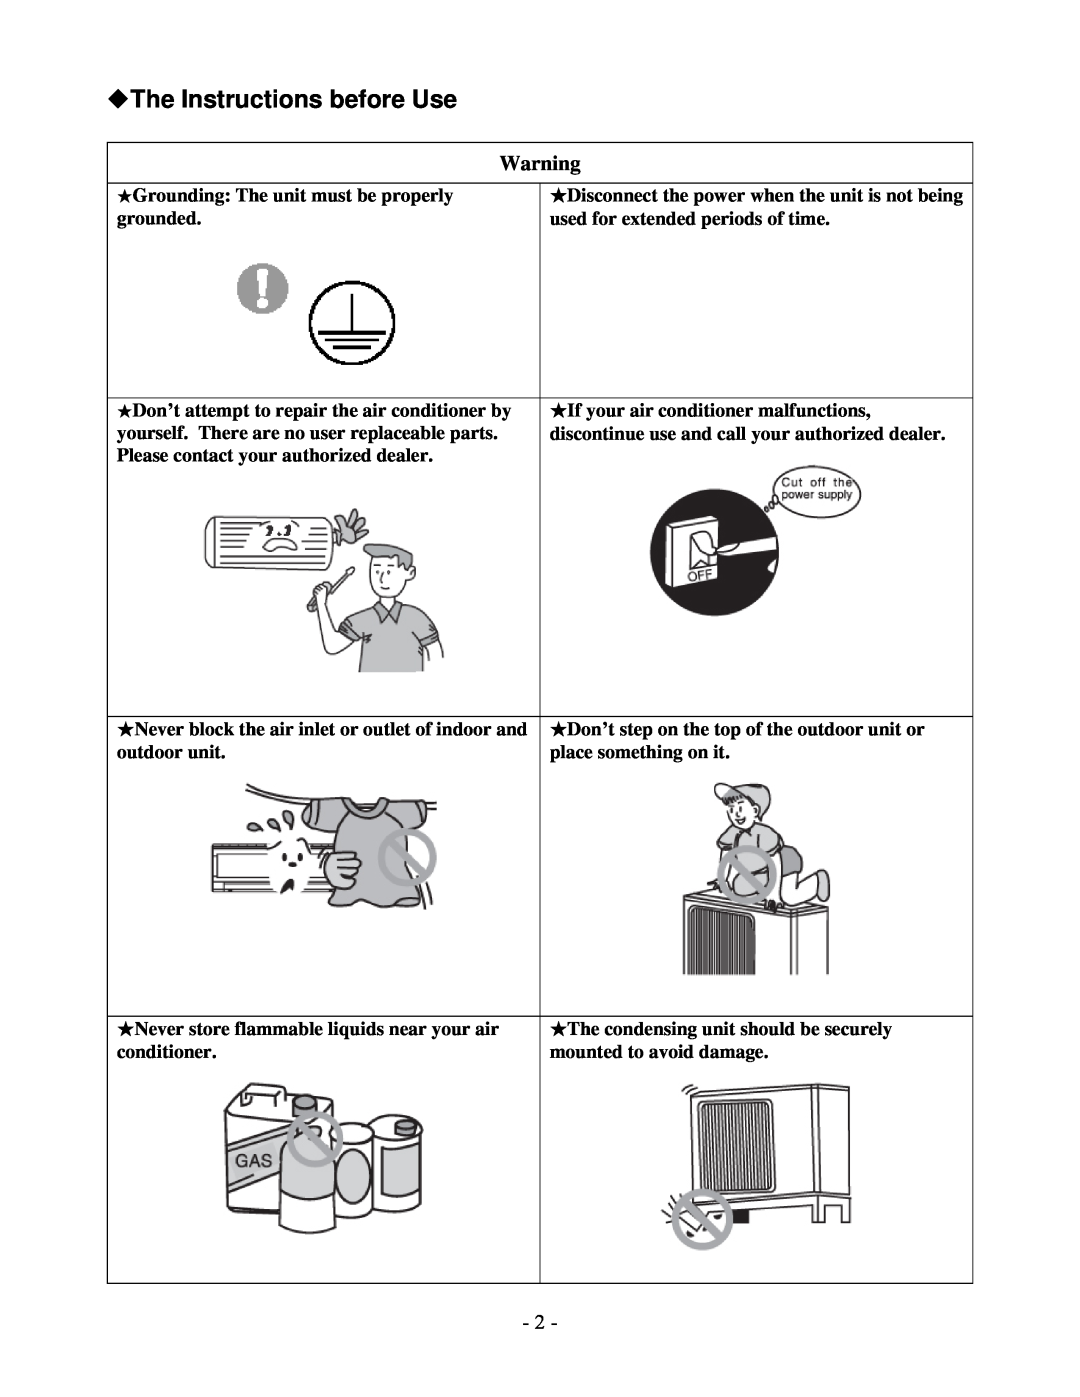 Soleus Air KFHIP-09-OD installation manual The Instructions before Use 